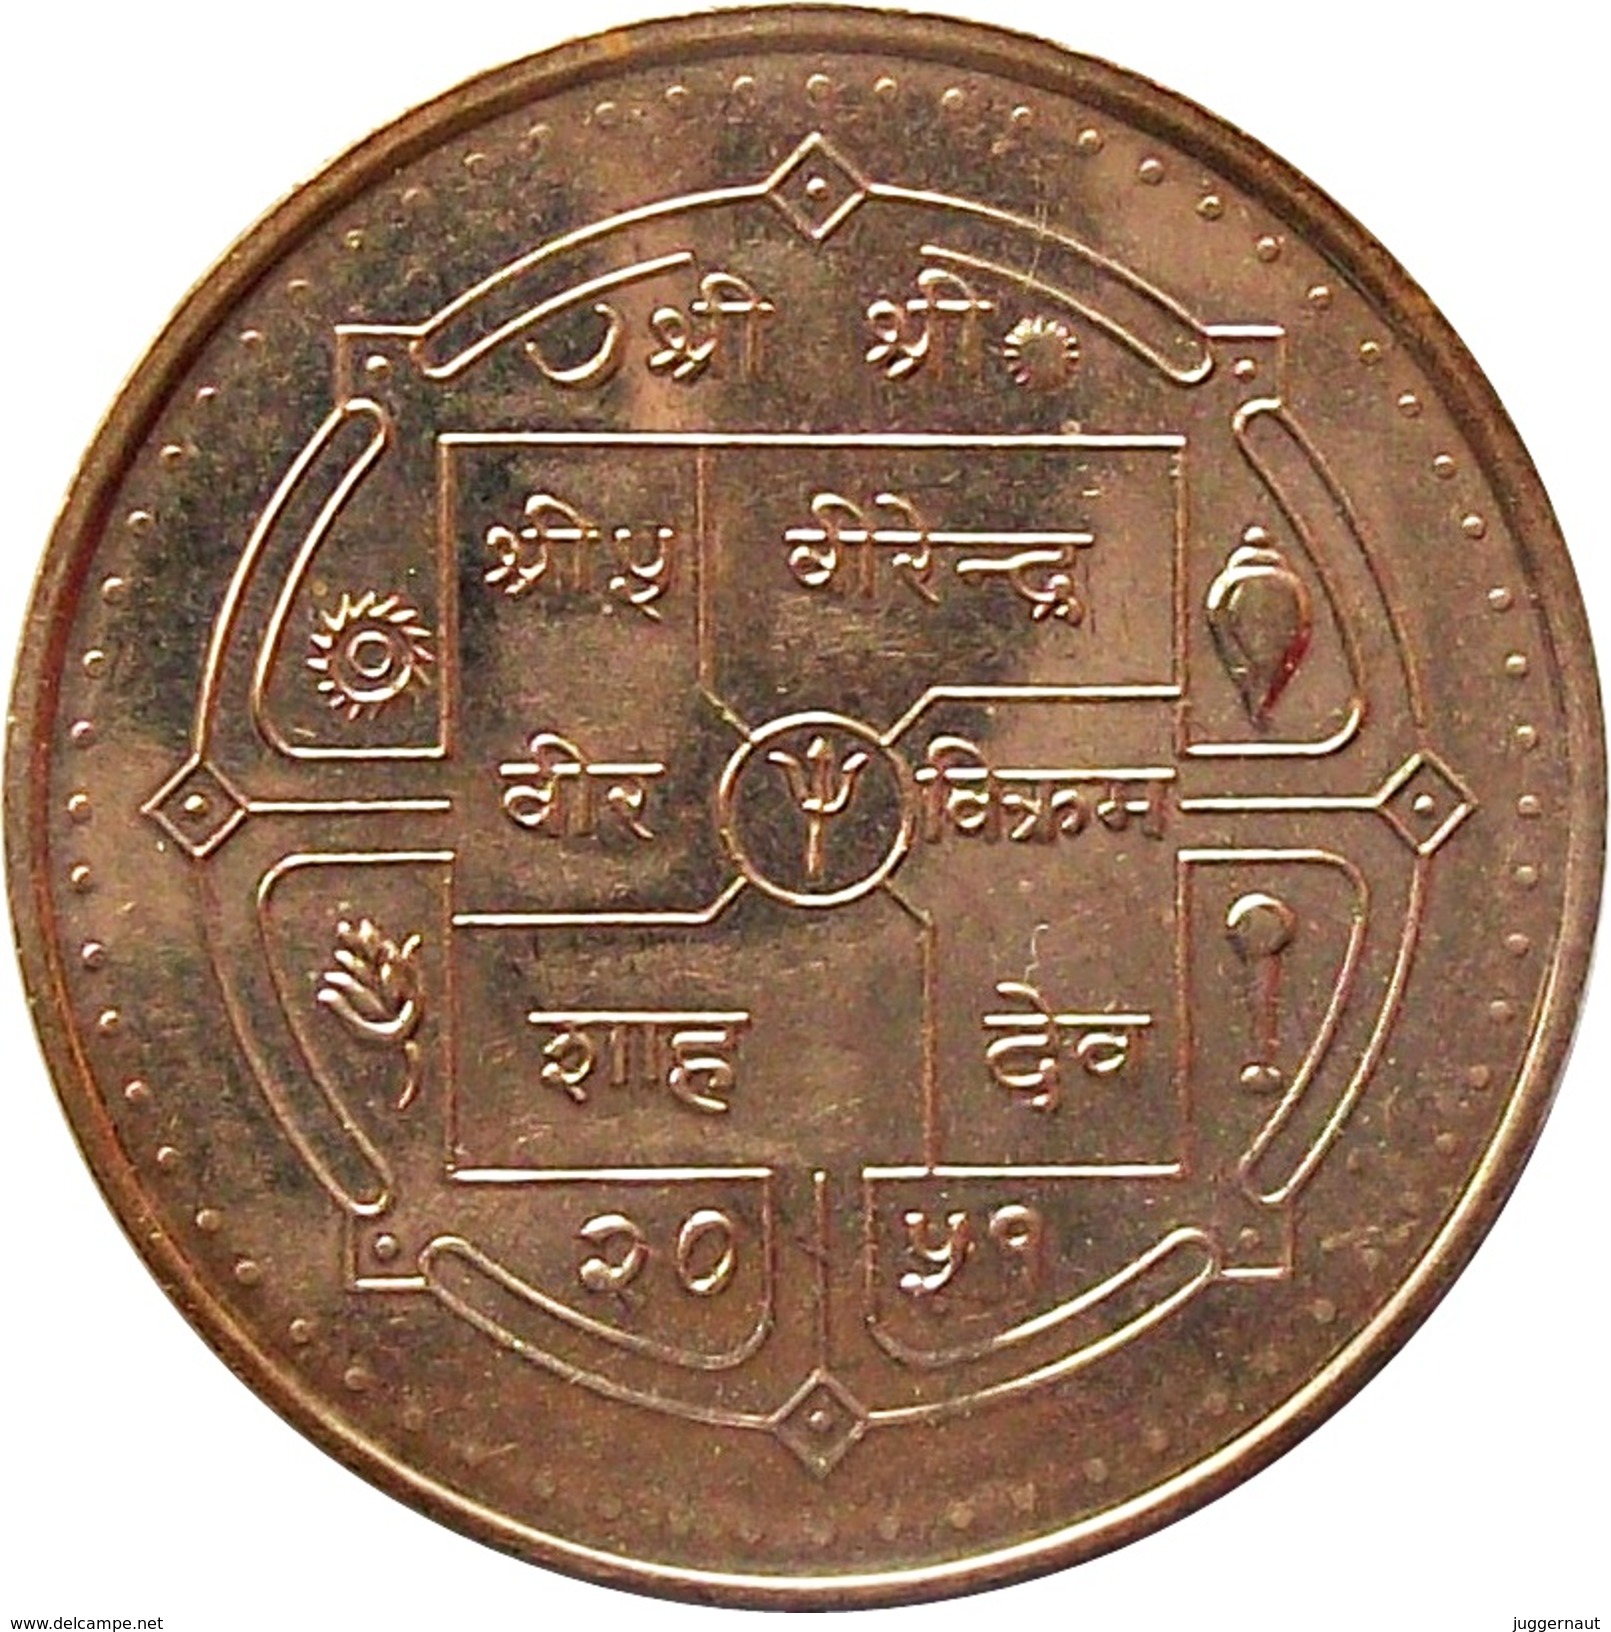 NEW CONSTITUTION OF NEPAL RUPEE 10 COMMEMORATIVE COIN 1994 KM-1076 UNCIRCULATED UNC - Nepal